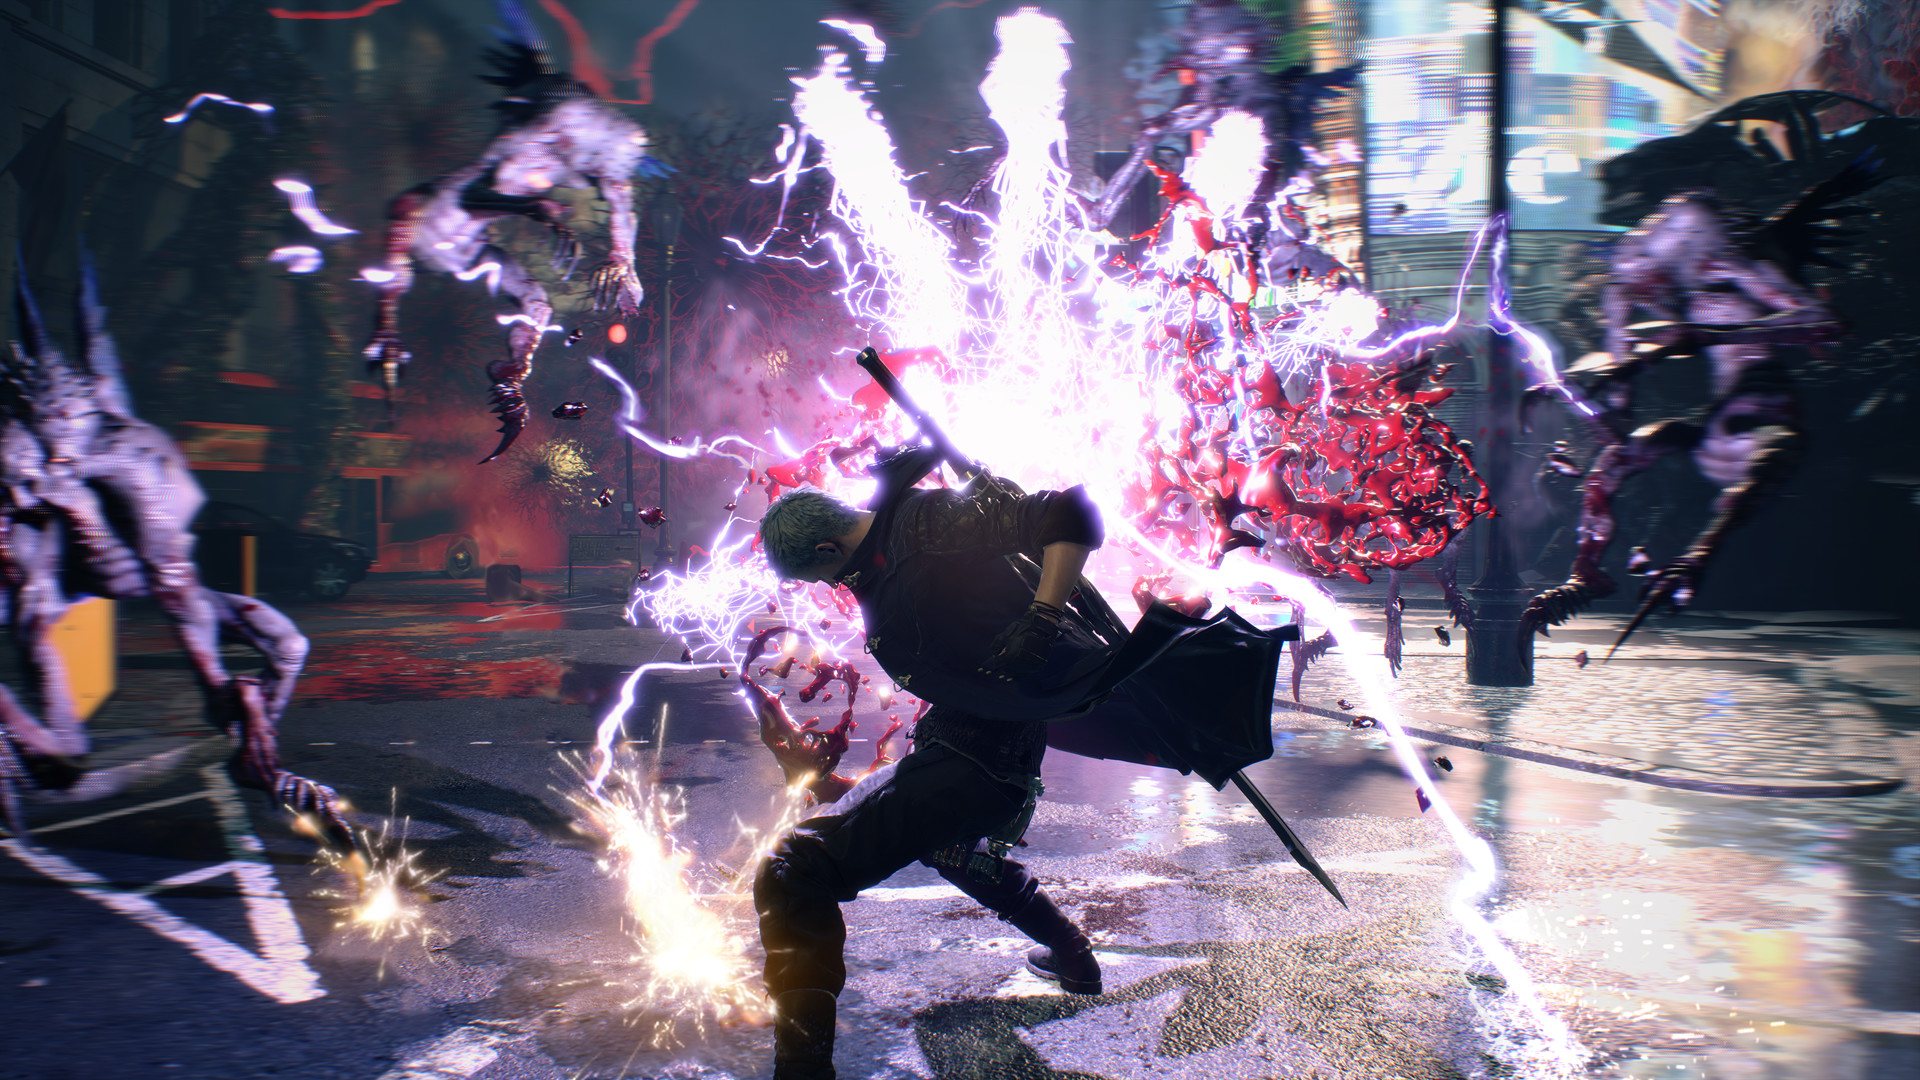 Devil May Cry 5 + Playable Character: Vergil DLC Steam CD Key 7.66 $